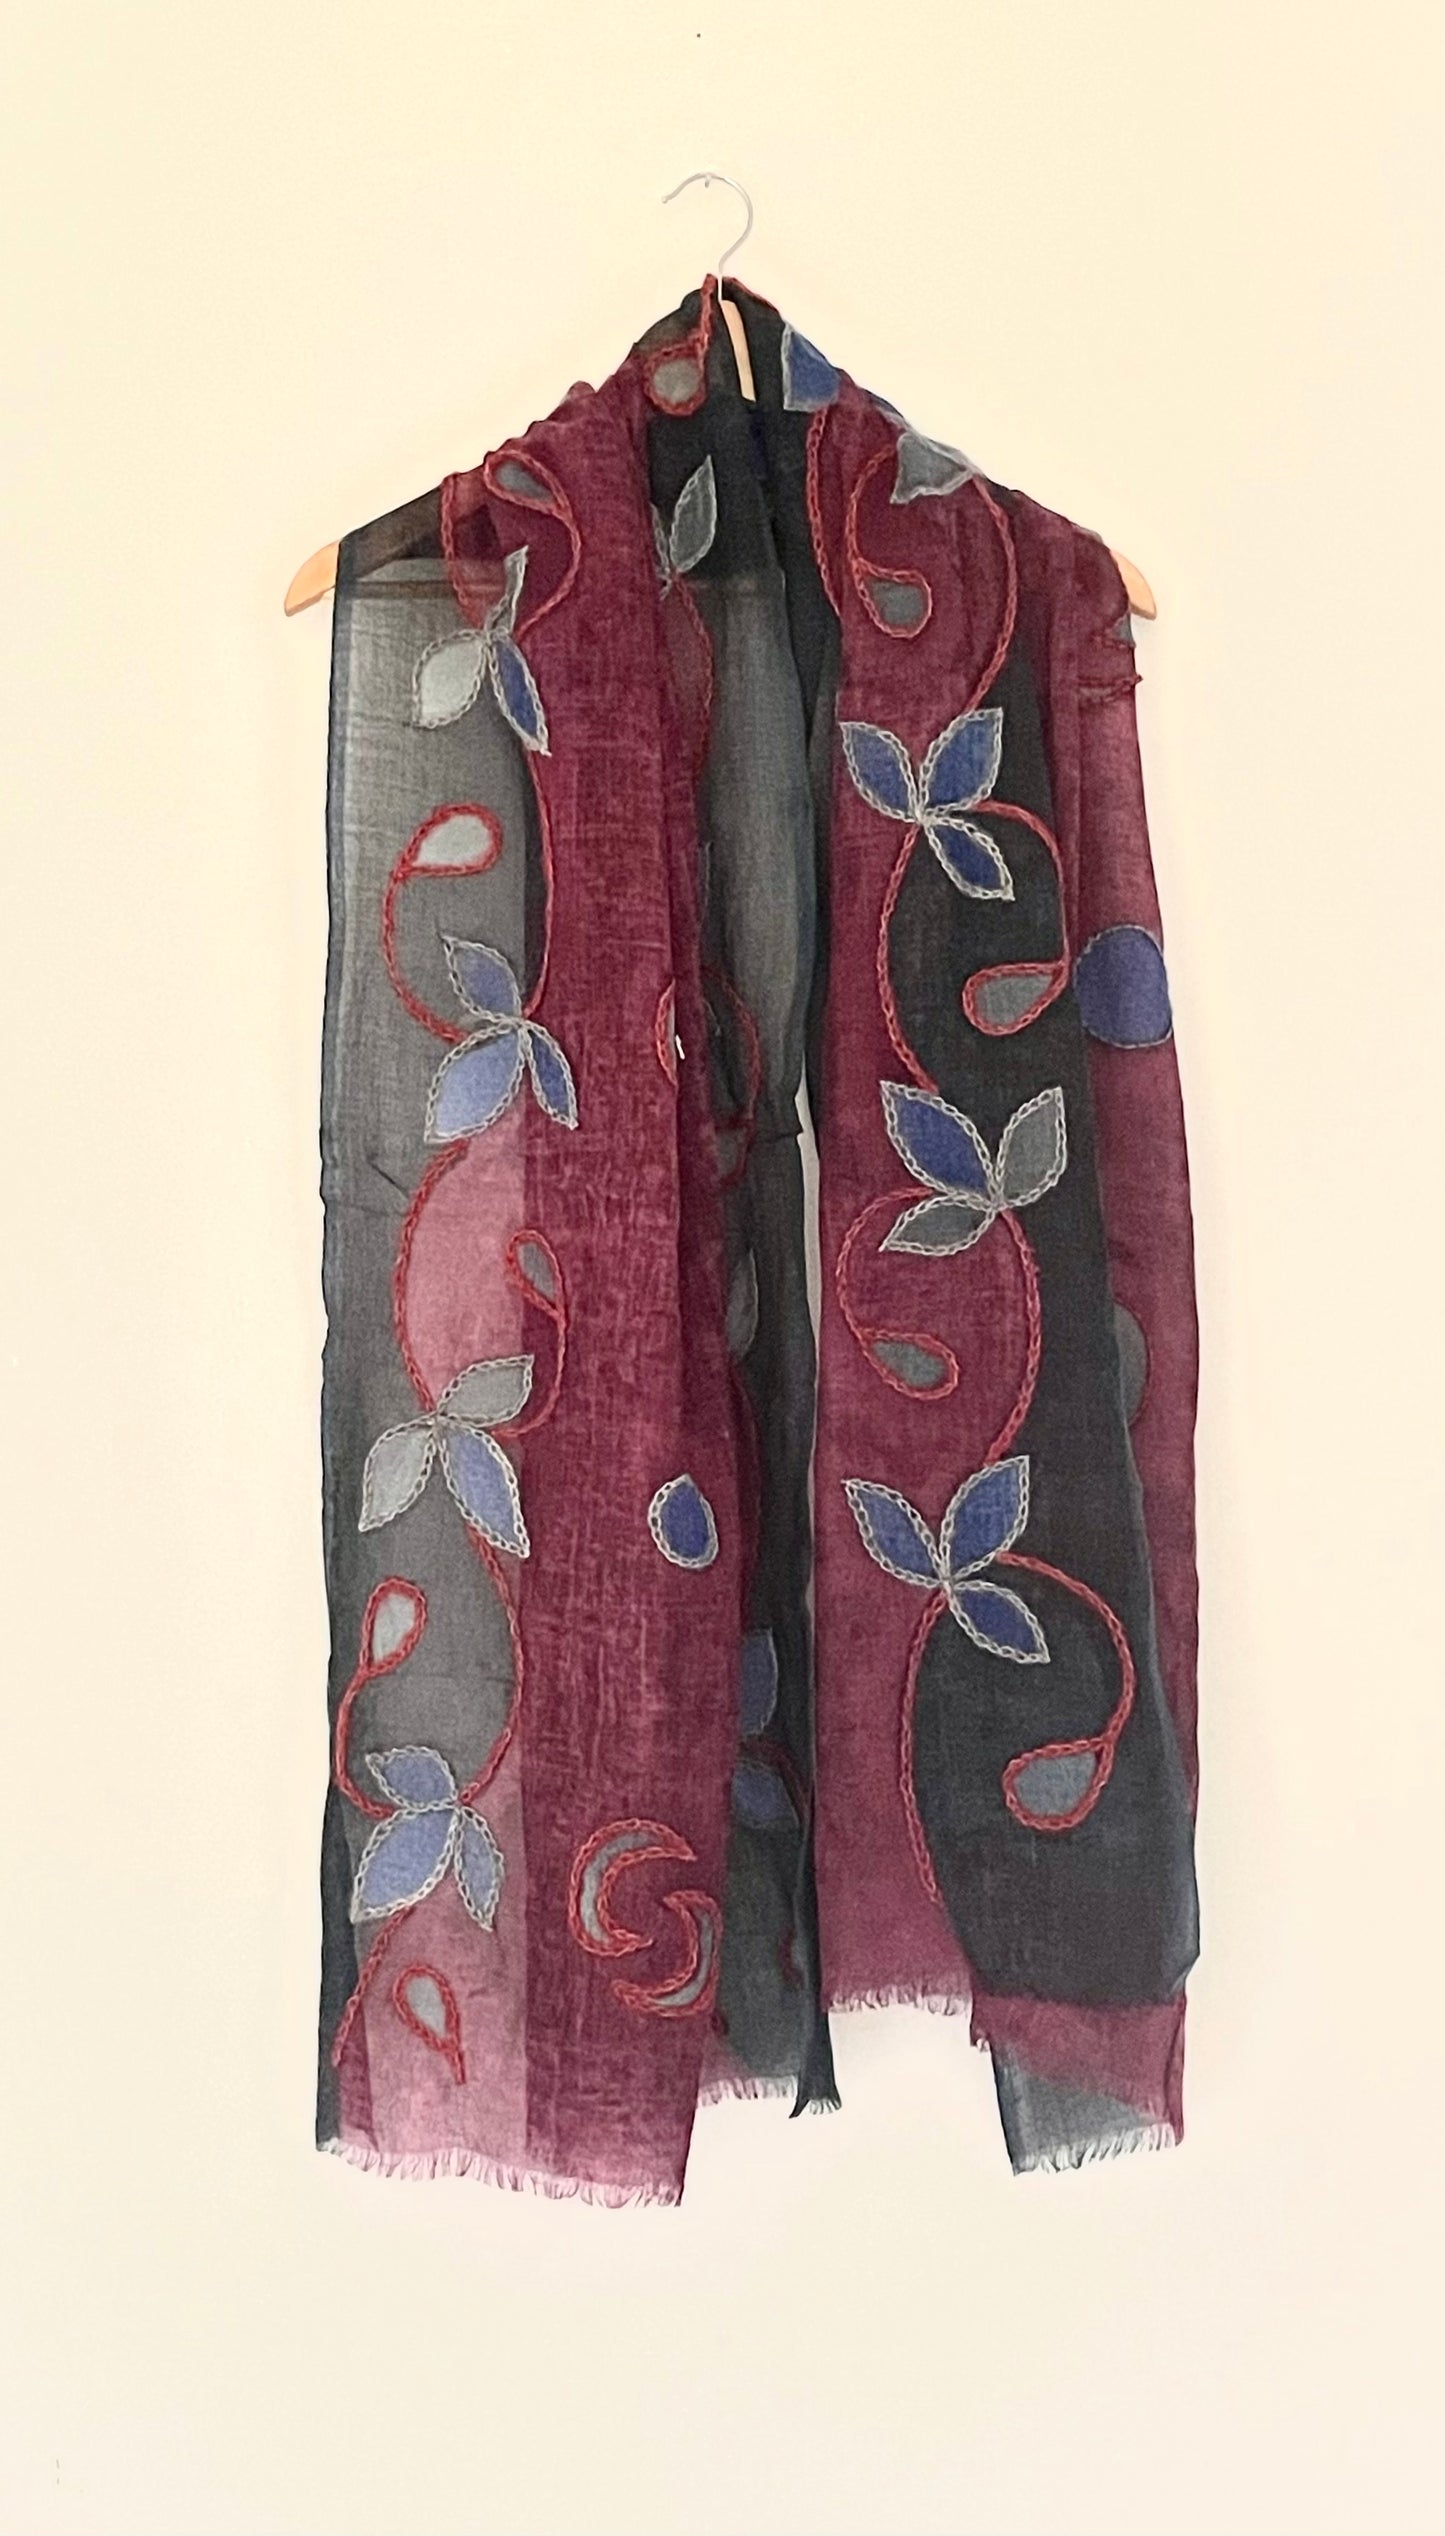 The Burgundy Scarf - Hand Painted and Hand Embroidered